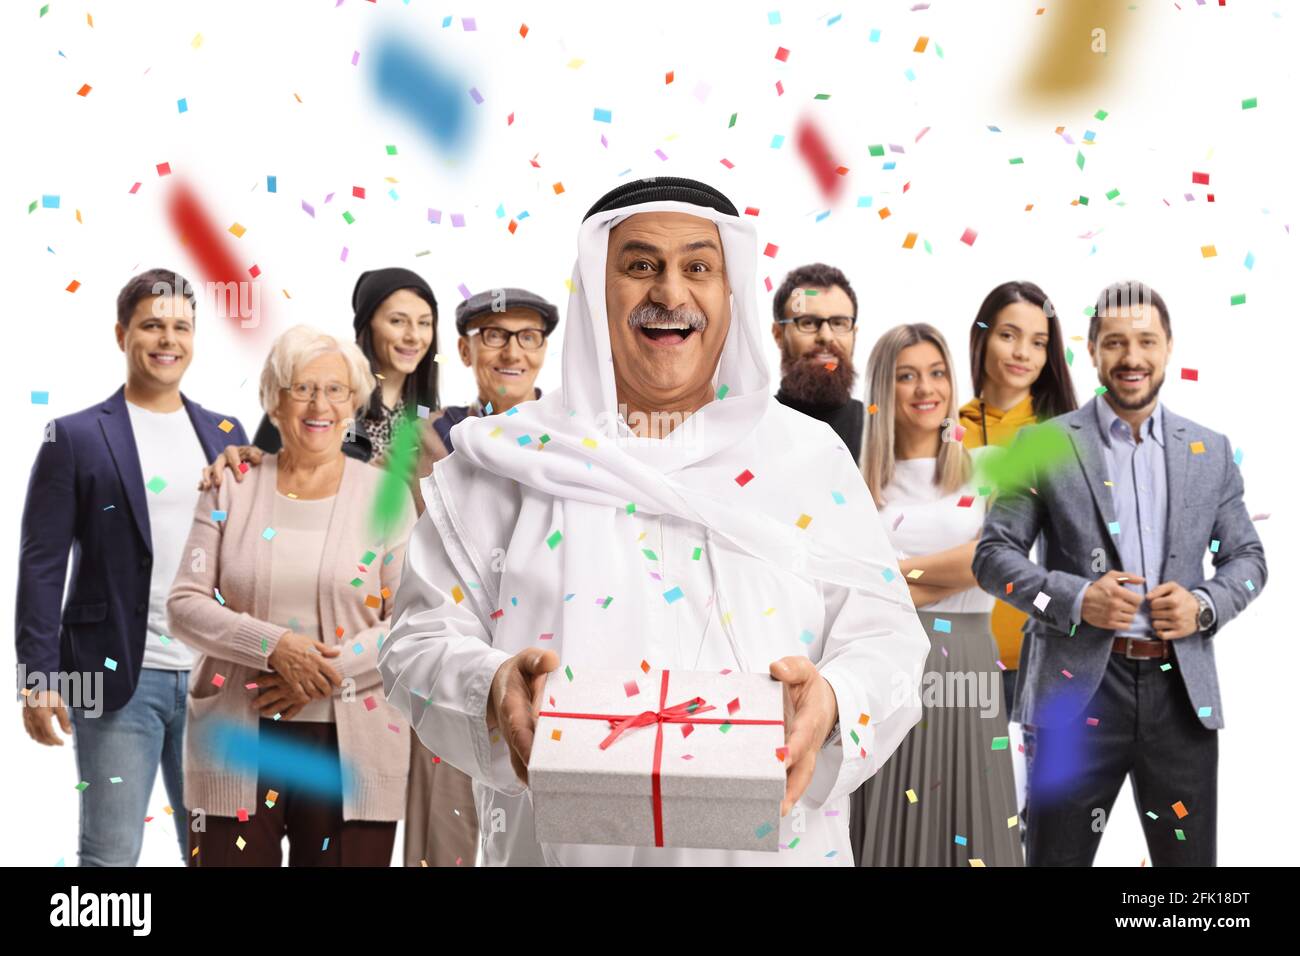 Arab man holding a present and celebrating birthday with family isolated on white background Stock Photo